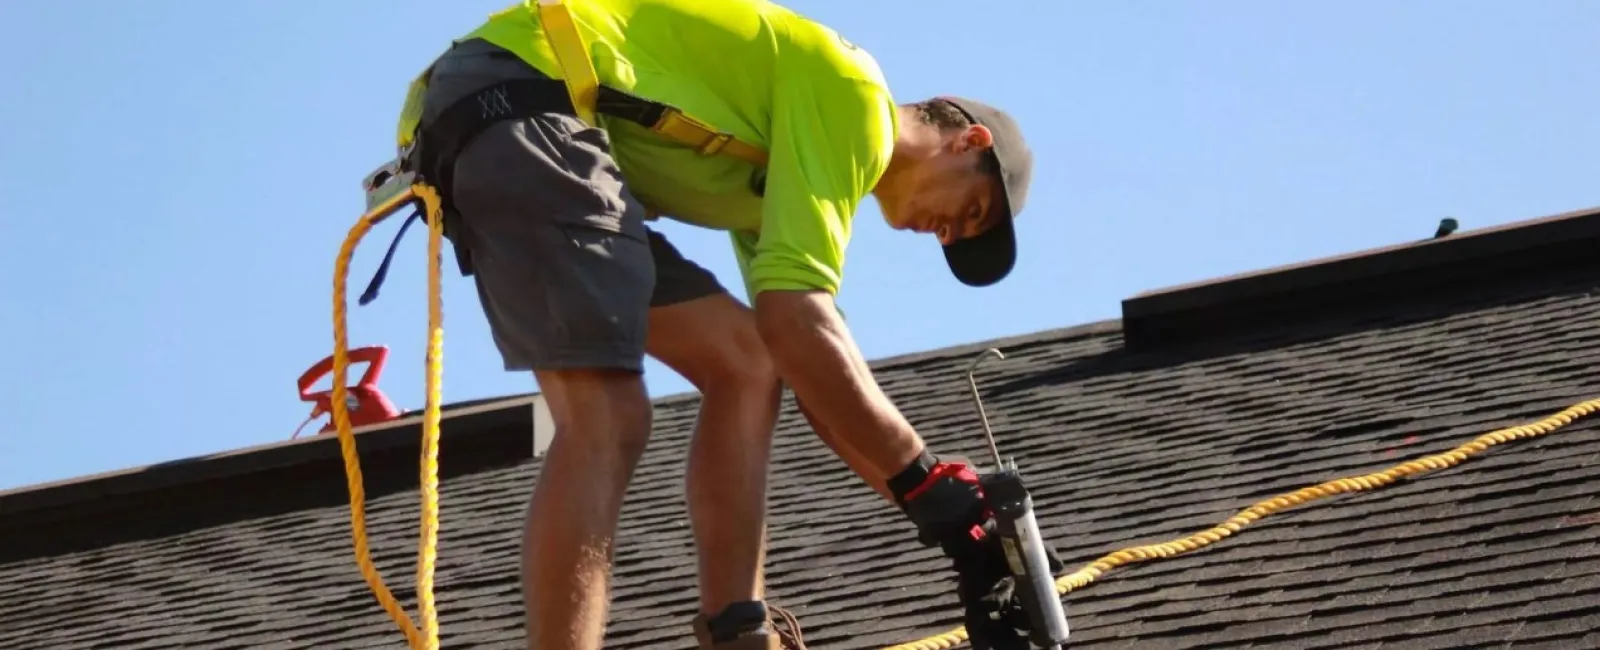 a person working on a roof